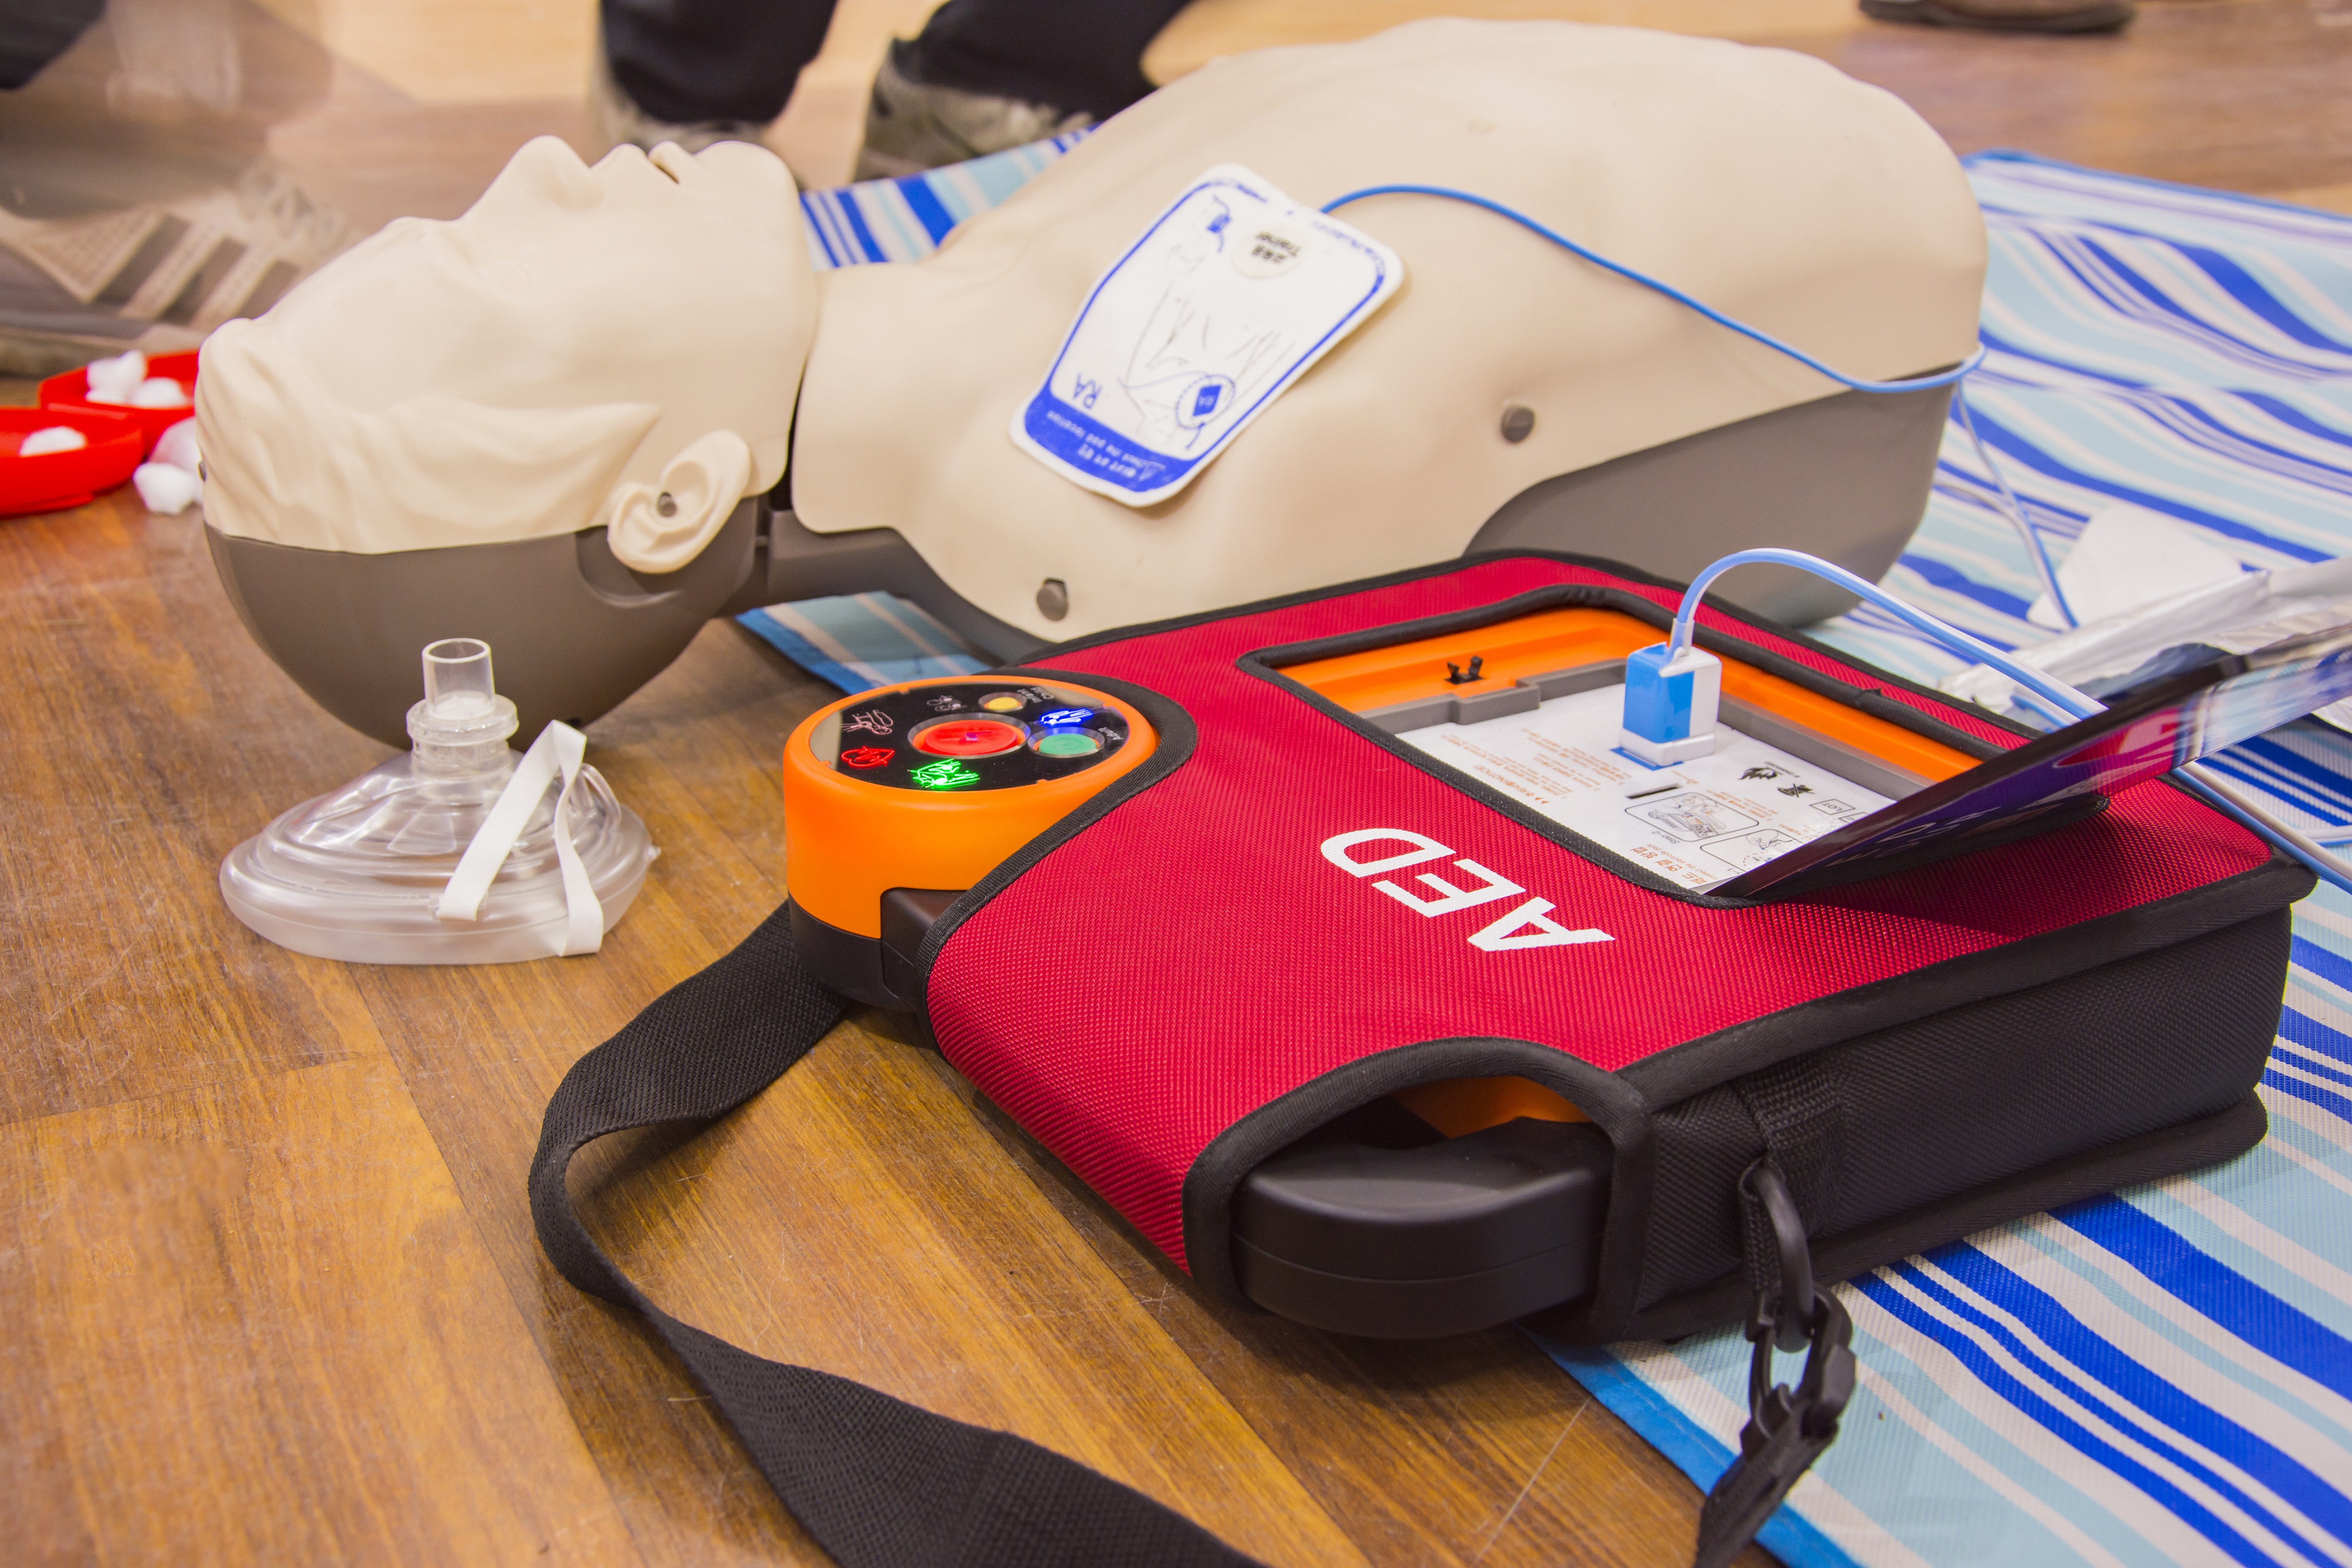 CPR AED First Aid Training Class January 29, 2022 in Tigard